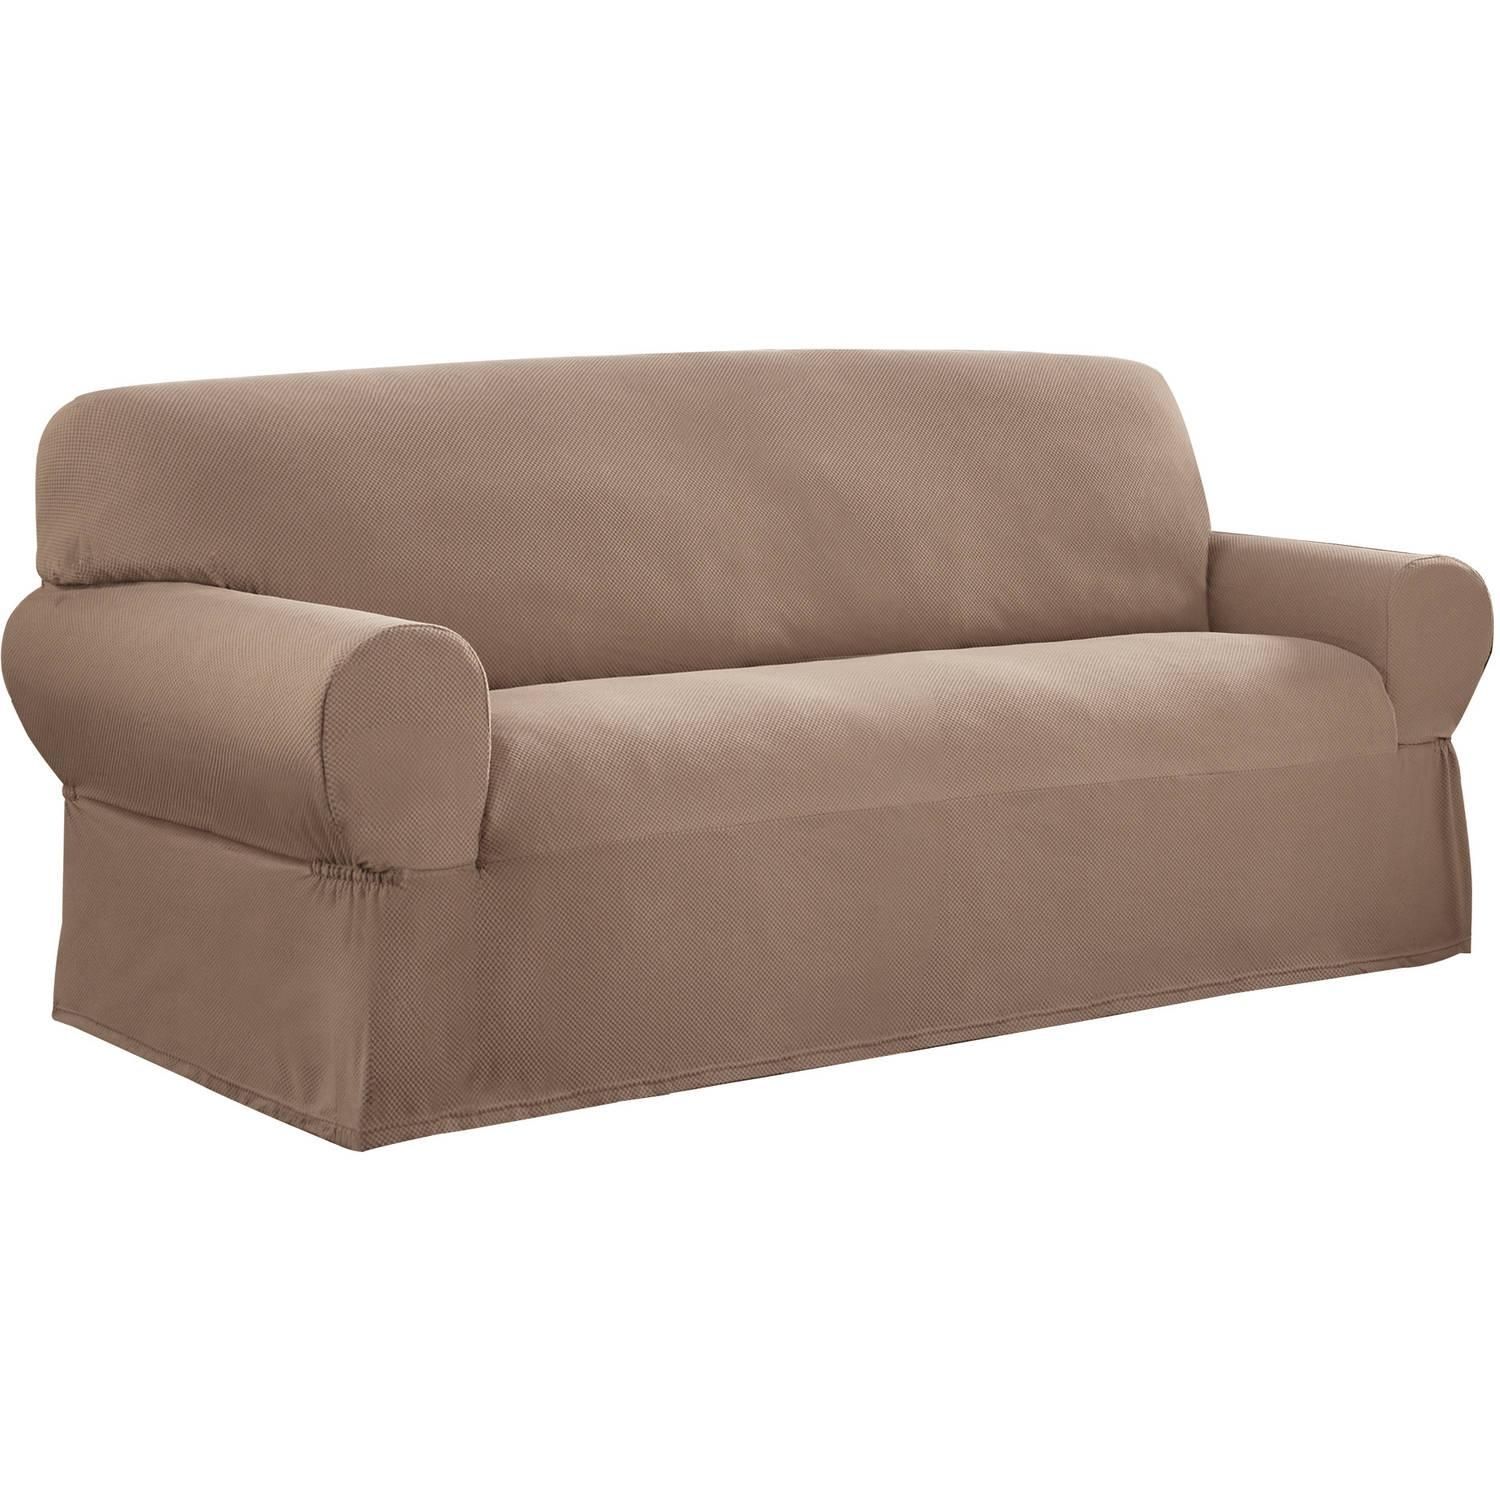 Slipcovers – Walmart With Regard To Slip Covers For Love Seats (View 12 of 20)